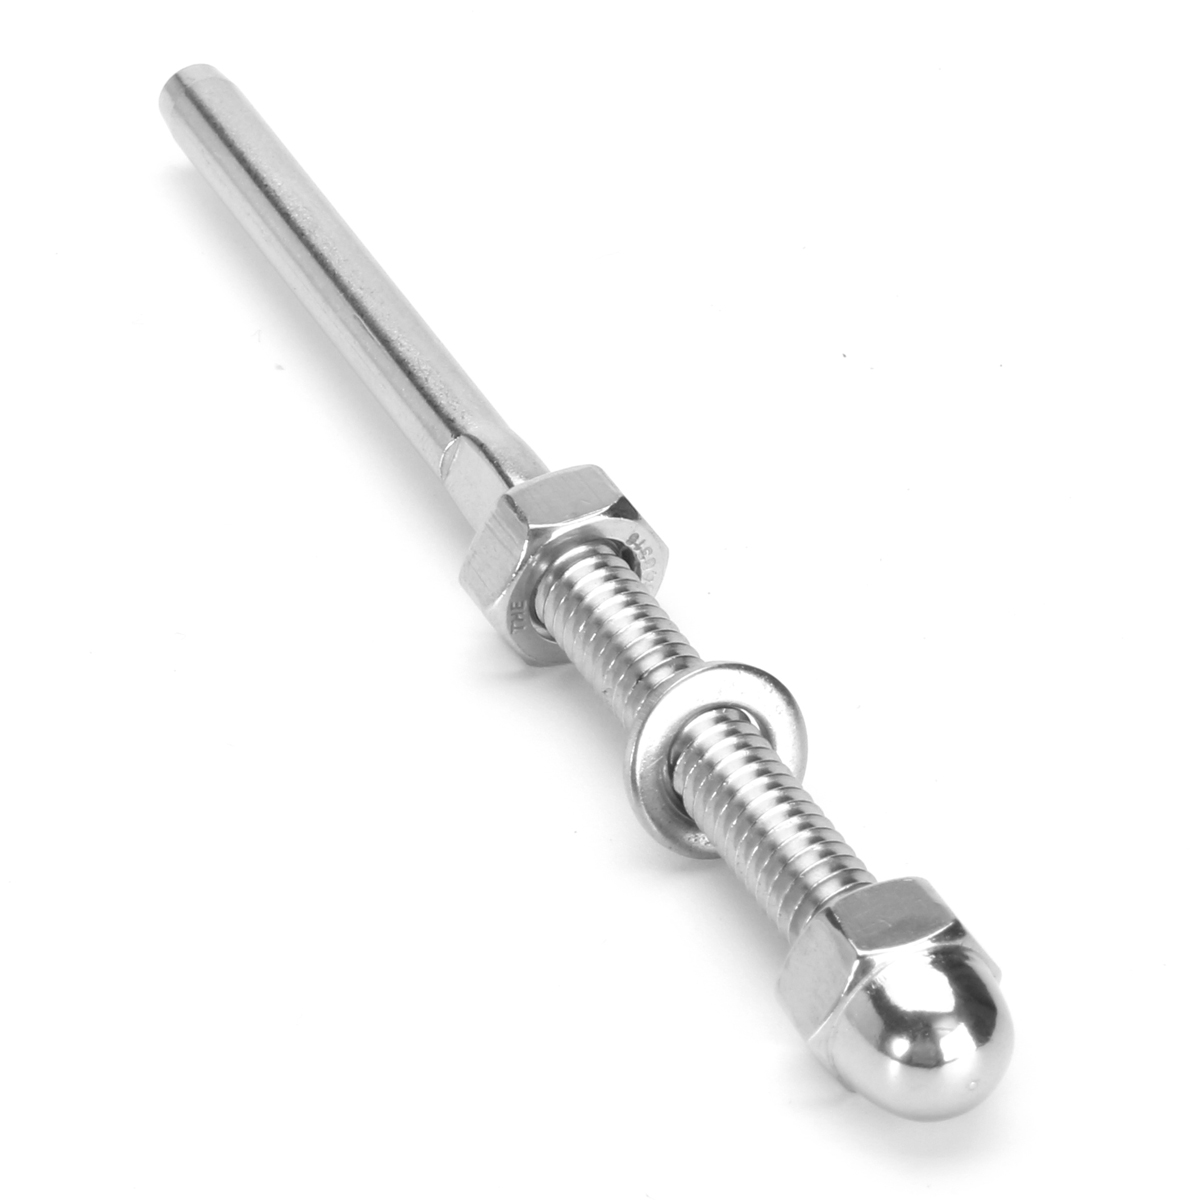 Stainless-Steel-Handrail-Railing-Cable-Tensioner-Threaded-Stud-End-Fitting-for-18-Inch-Cable-Wire-1197387-1